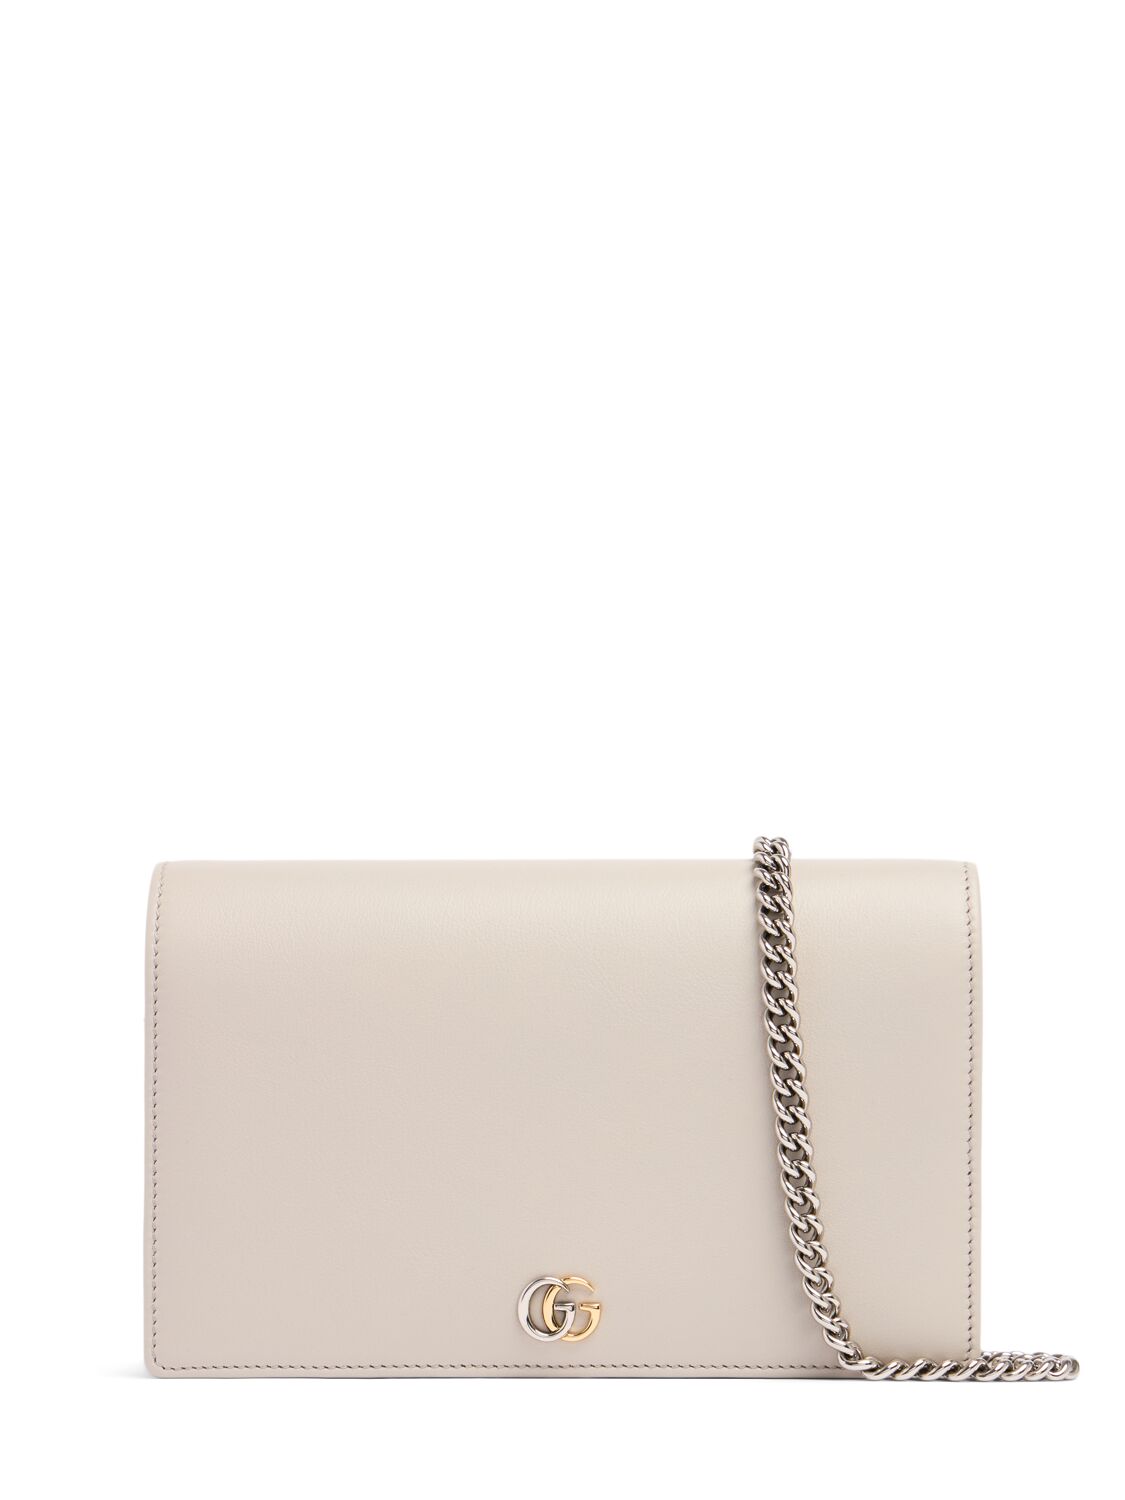 Gucci Petite Marmont Leather Chain Wallet In Gray